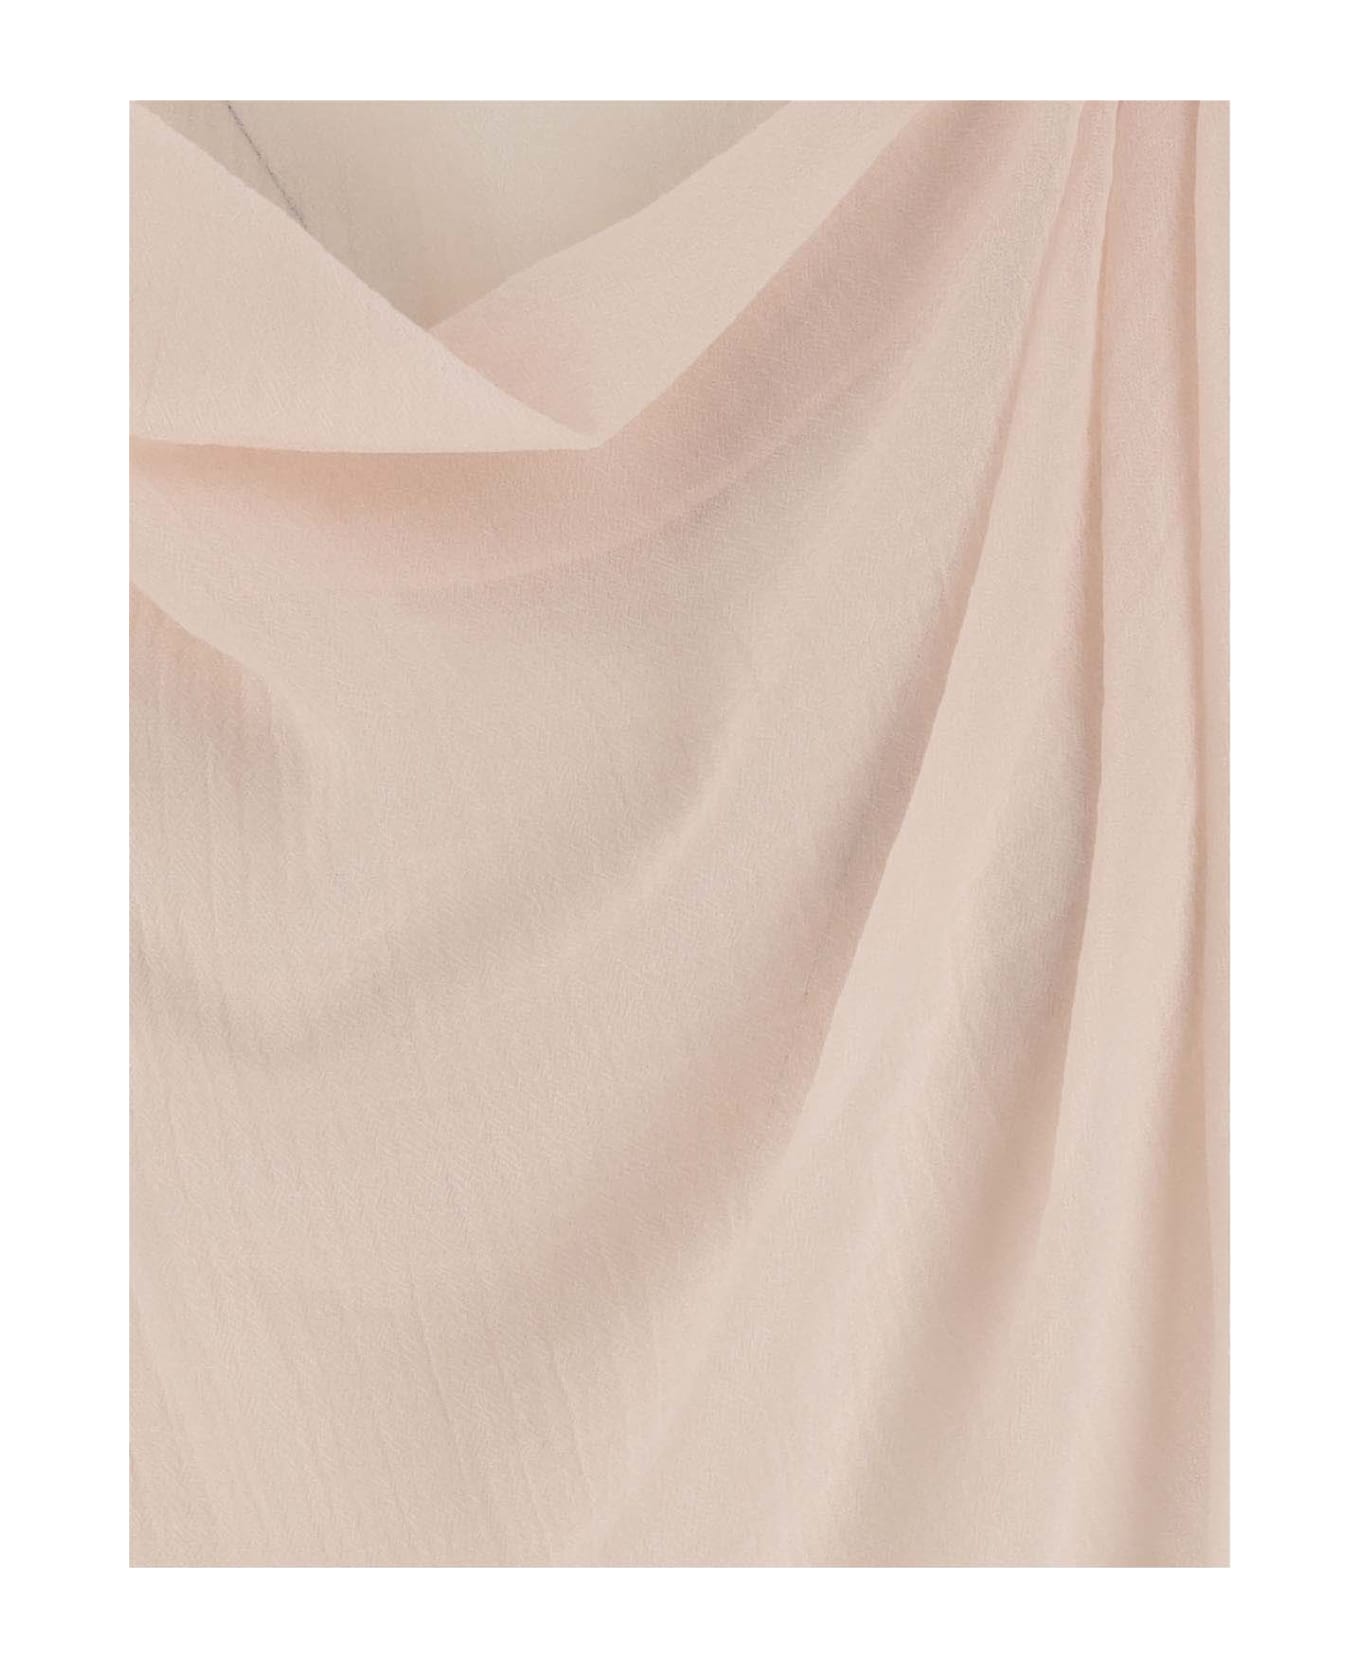 Chloé Draped Top With Boat Neckline - Pink